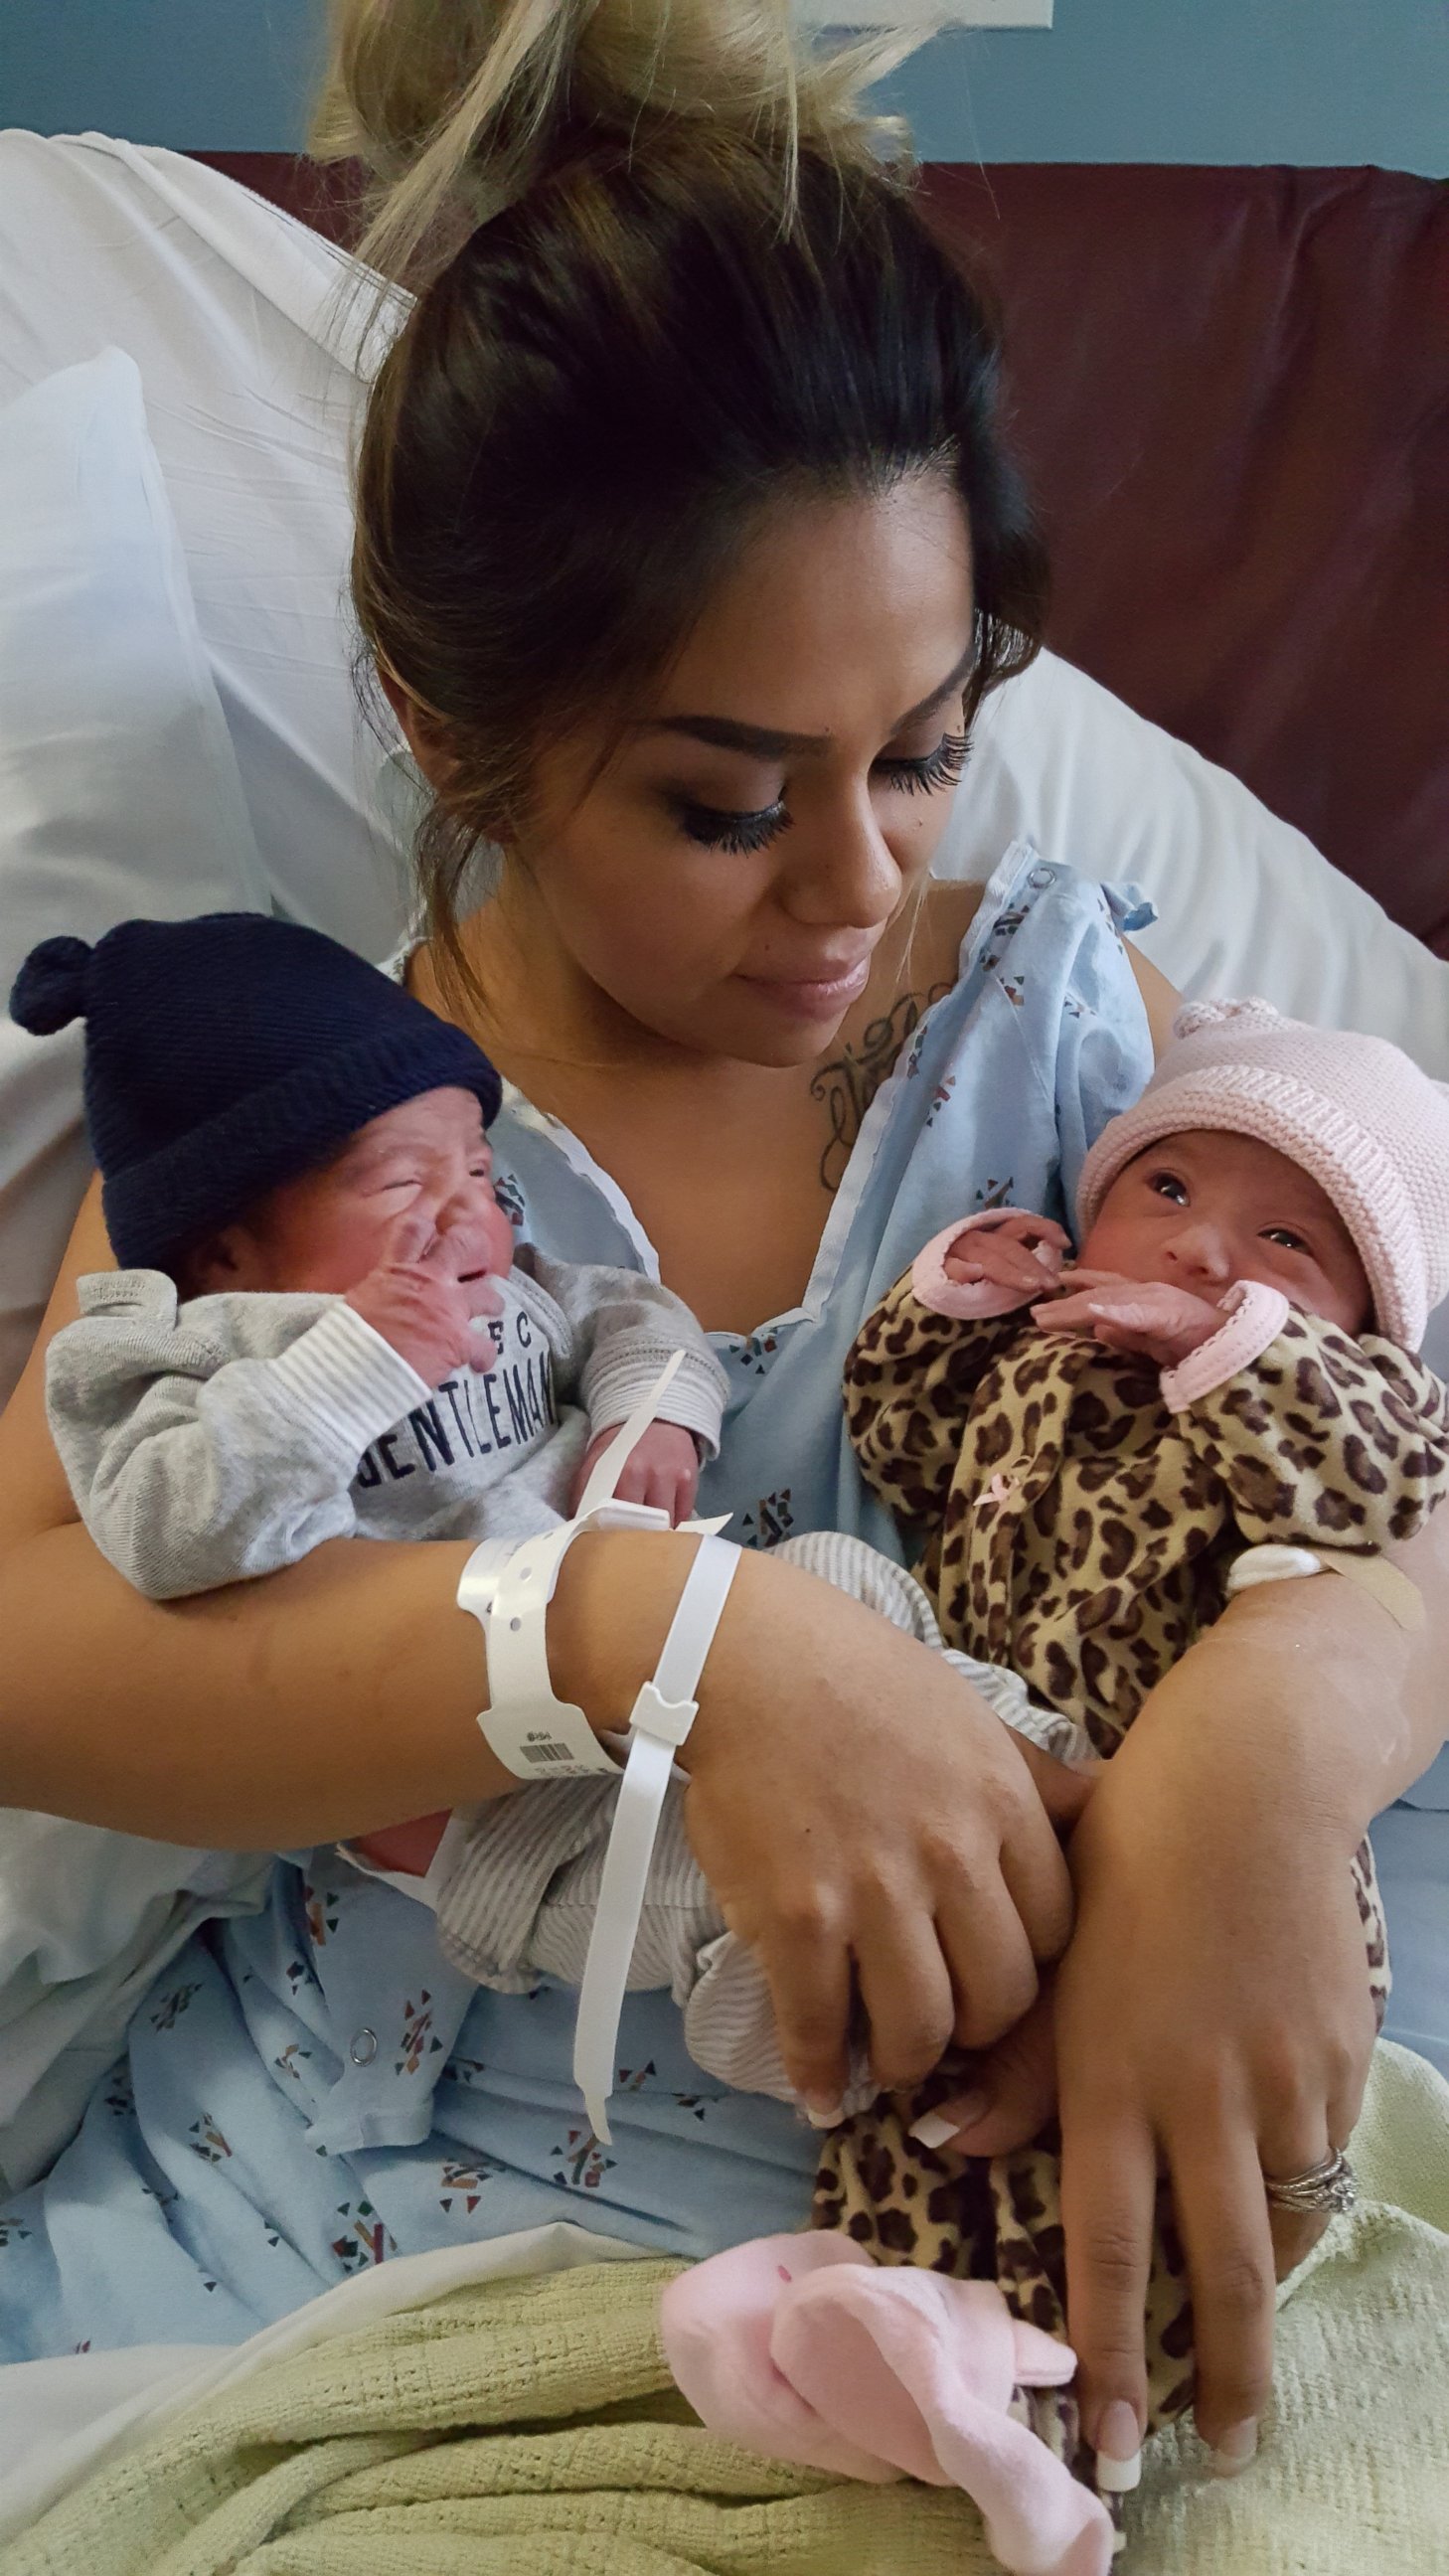 PHOTO: Maribel Valencia gave birth to daughter Jaelyn at 11:59 p.m. on Dec. 31, 2015 then delivered son Luis two minutes past midnight, at the San Diego Kaiser Permanente Zion Medical Center. 